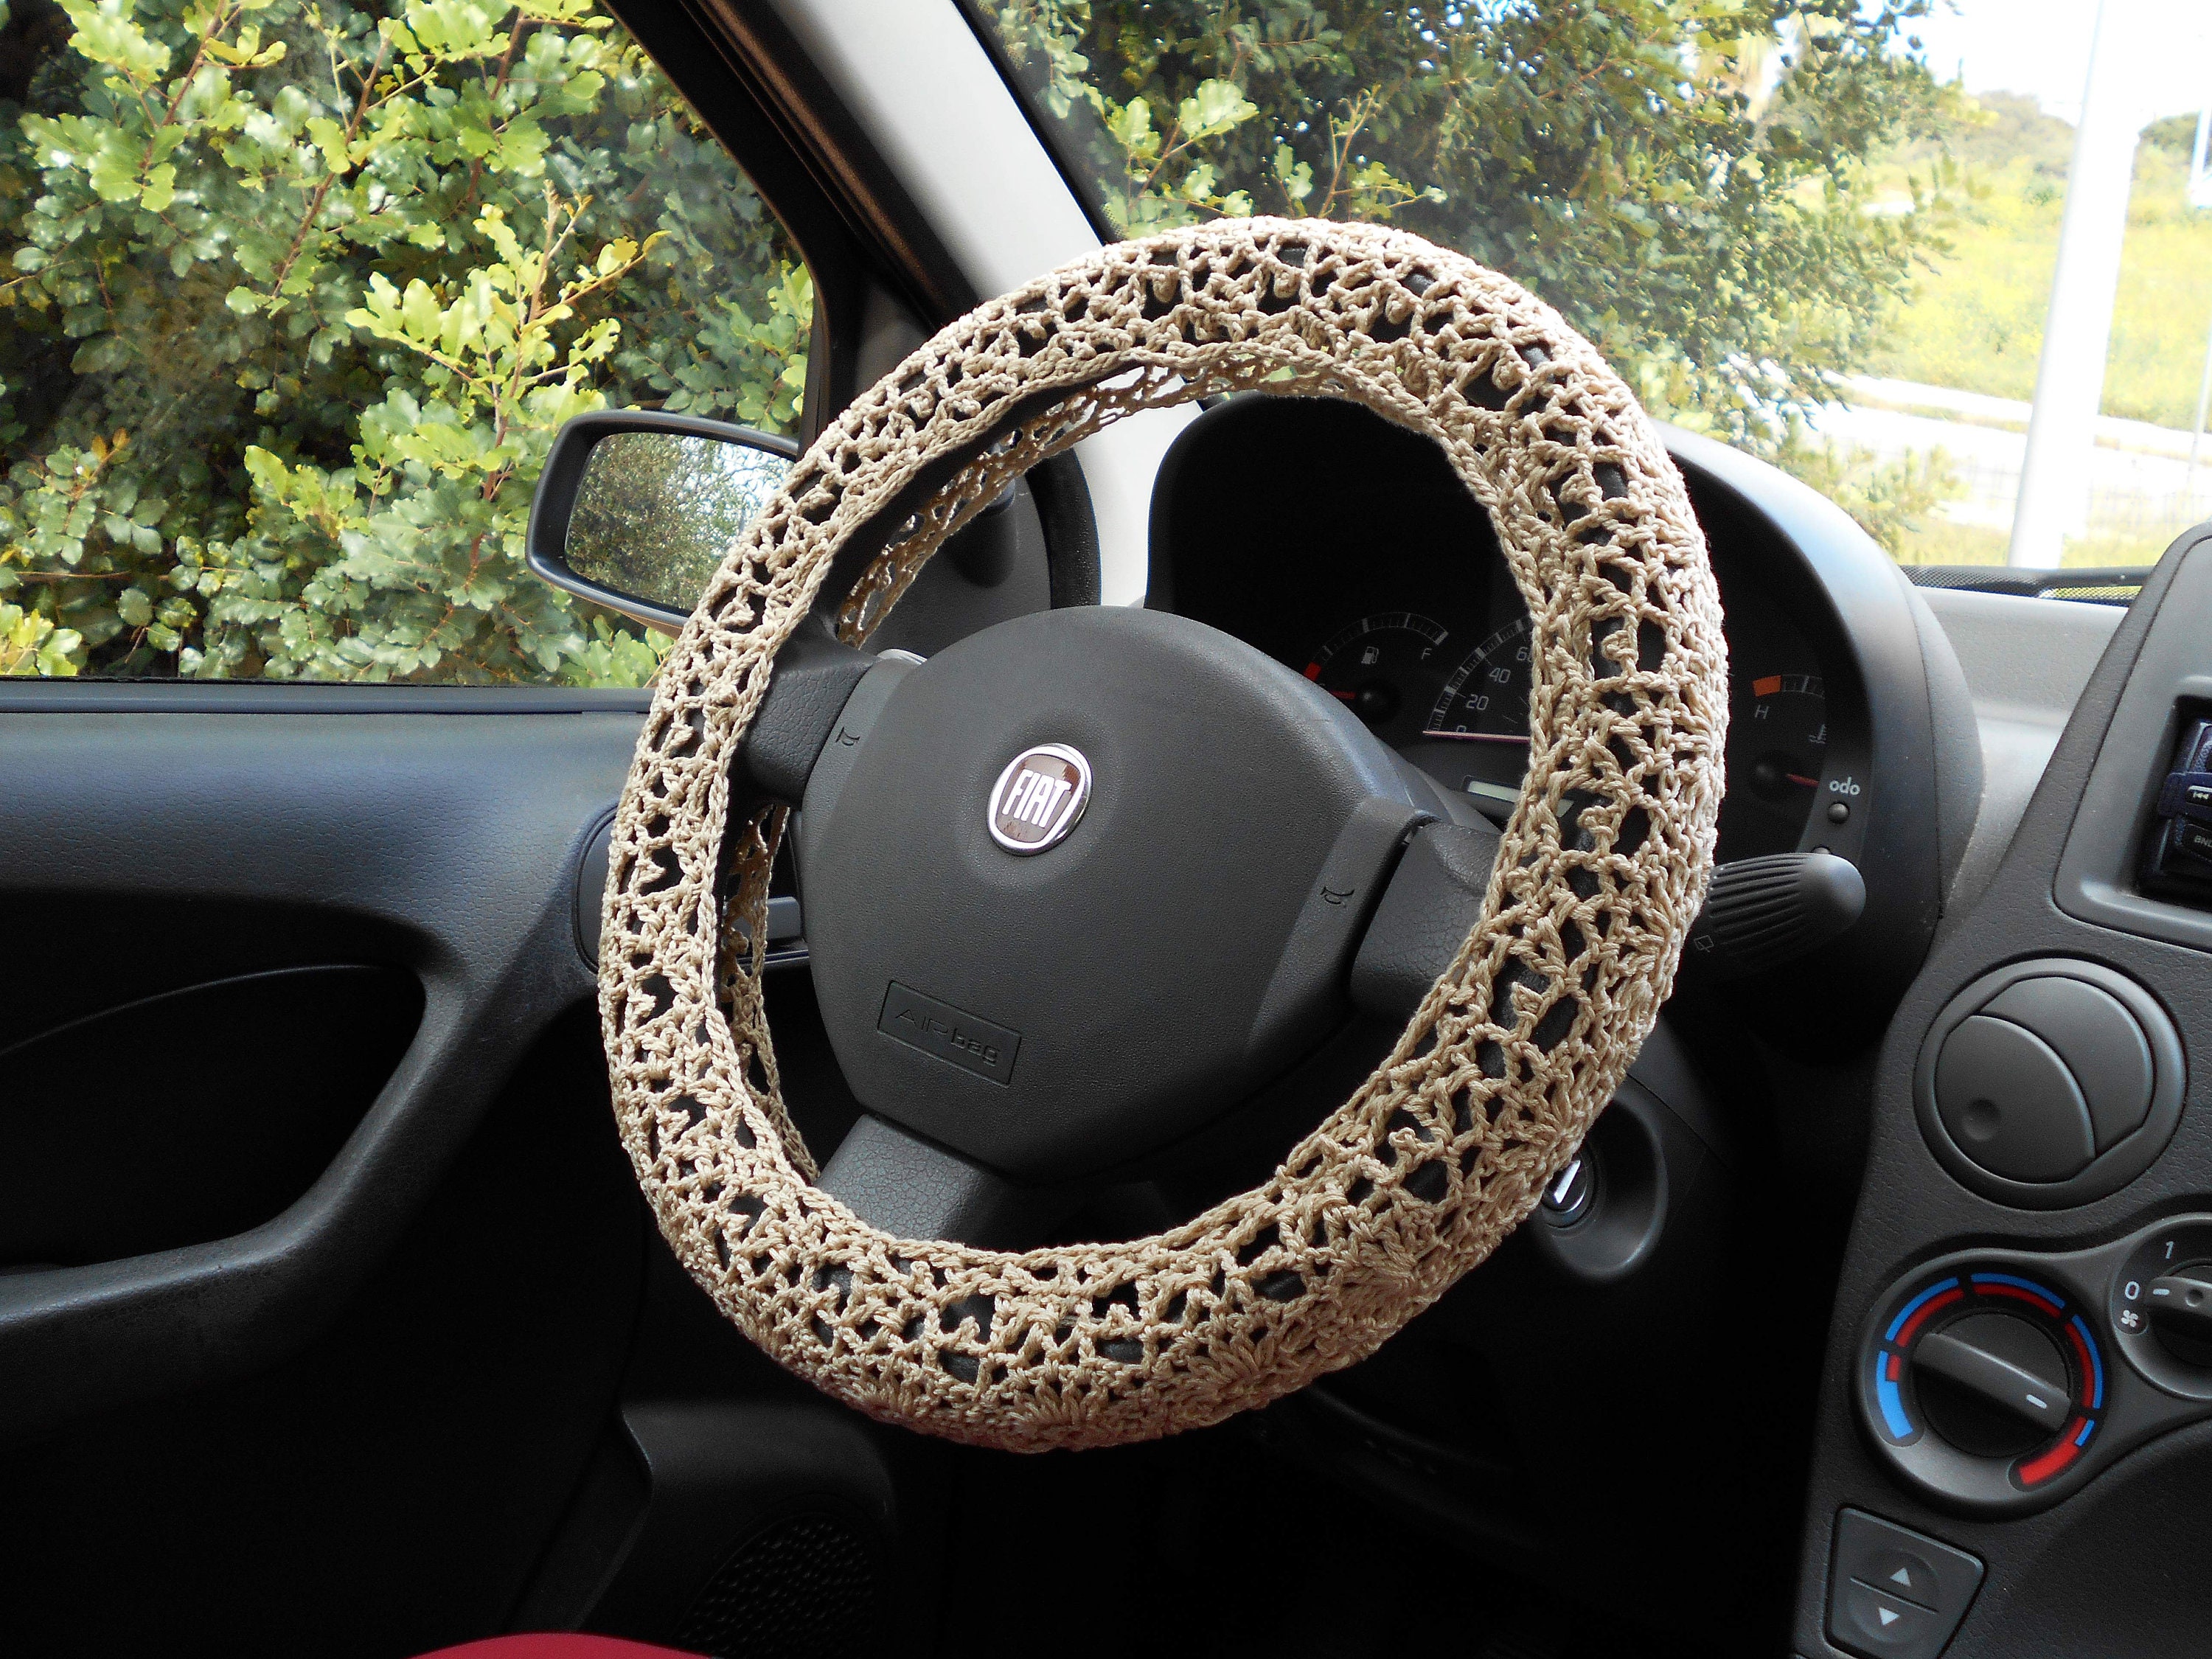 This video tutorial will show you how to crochet a bohemian style car  steering wheel cover. The design is of beaut…